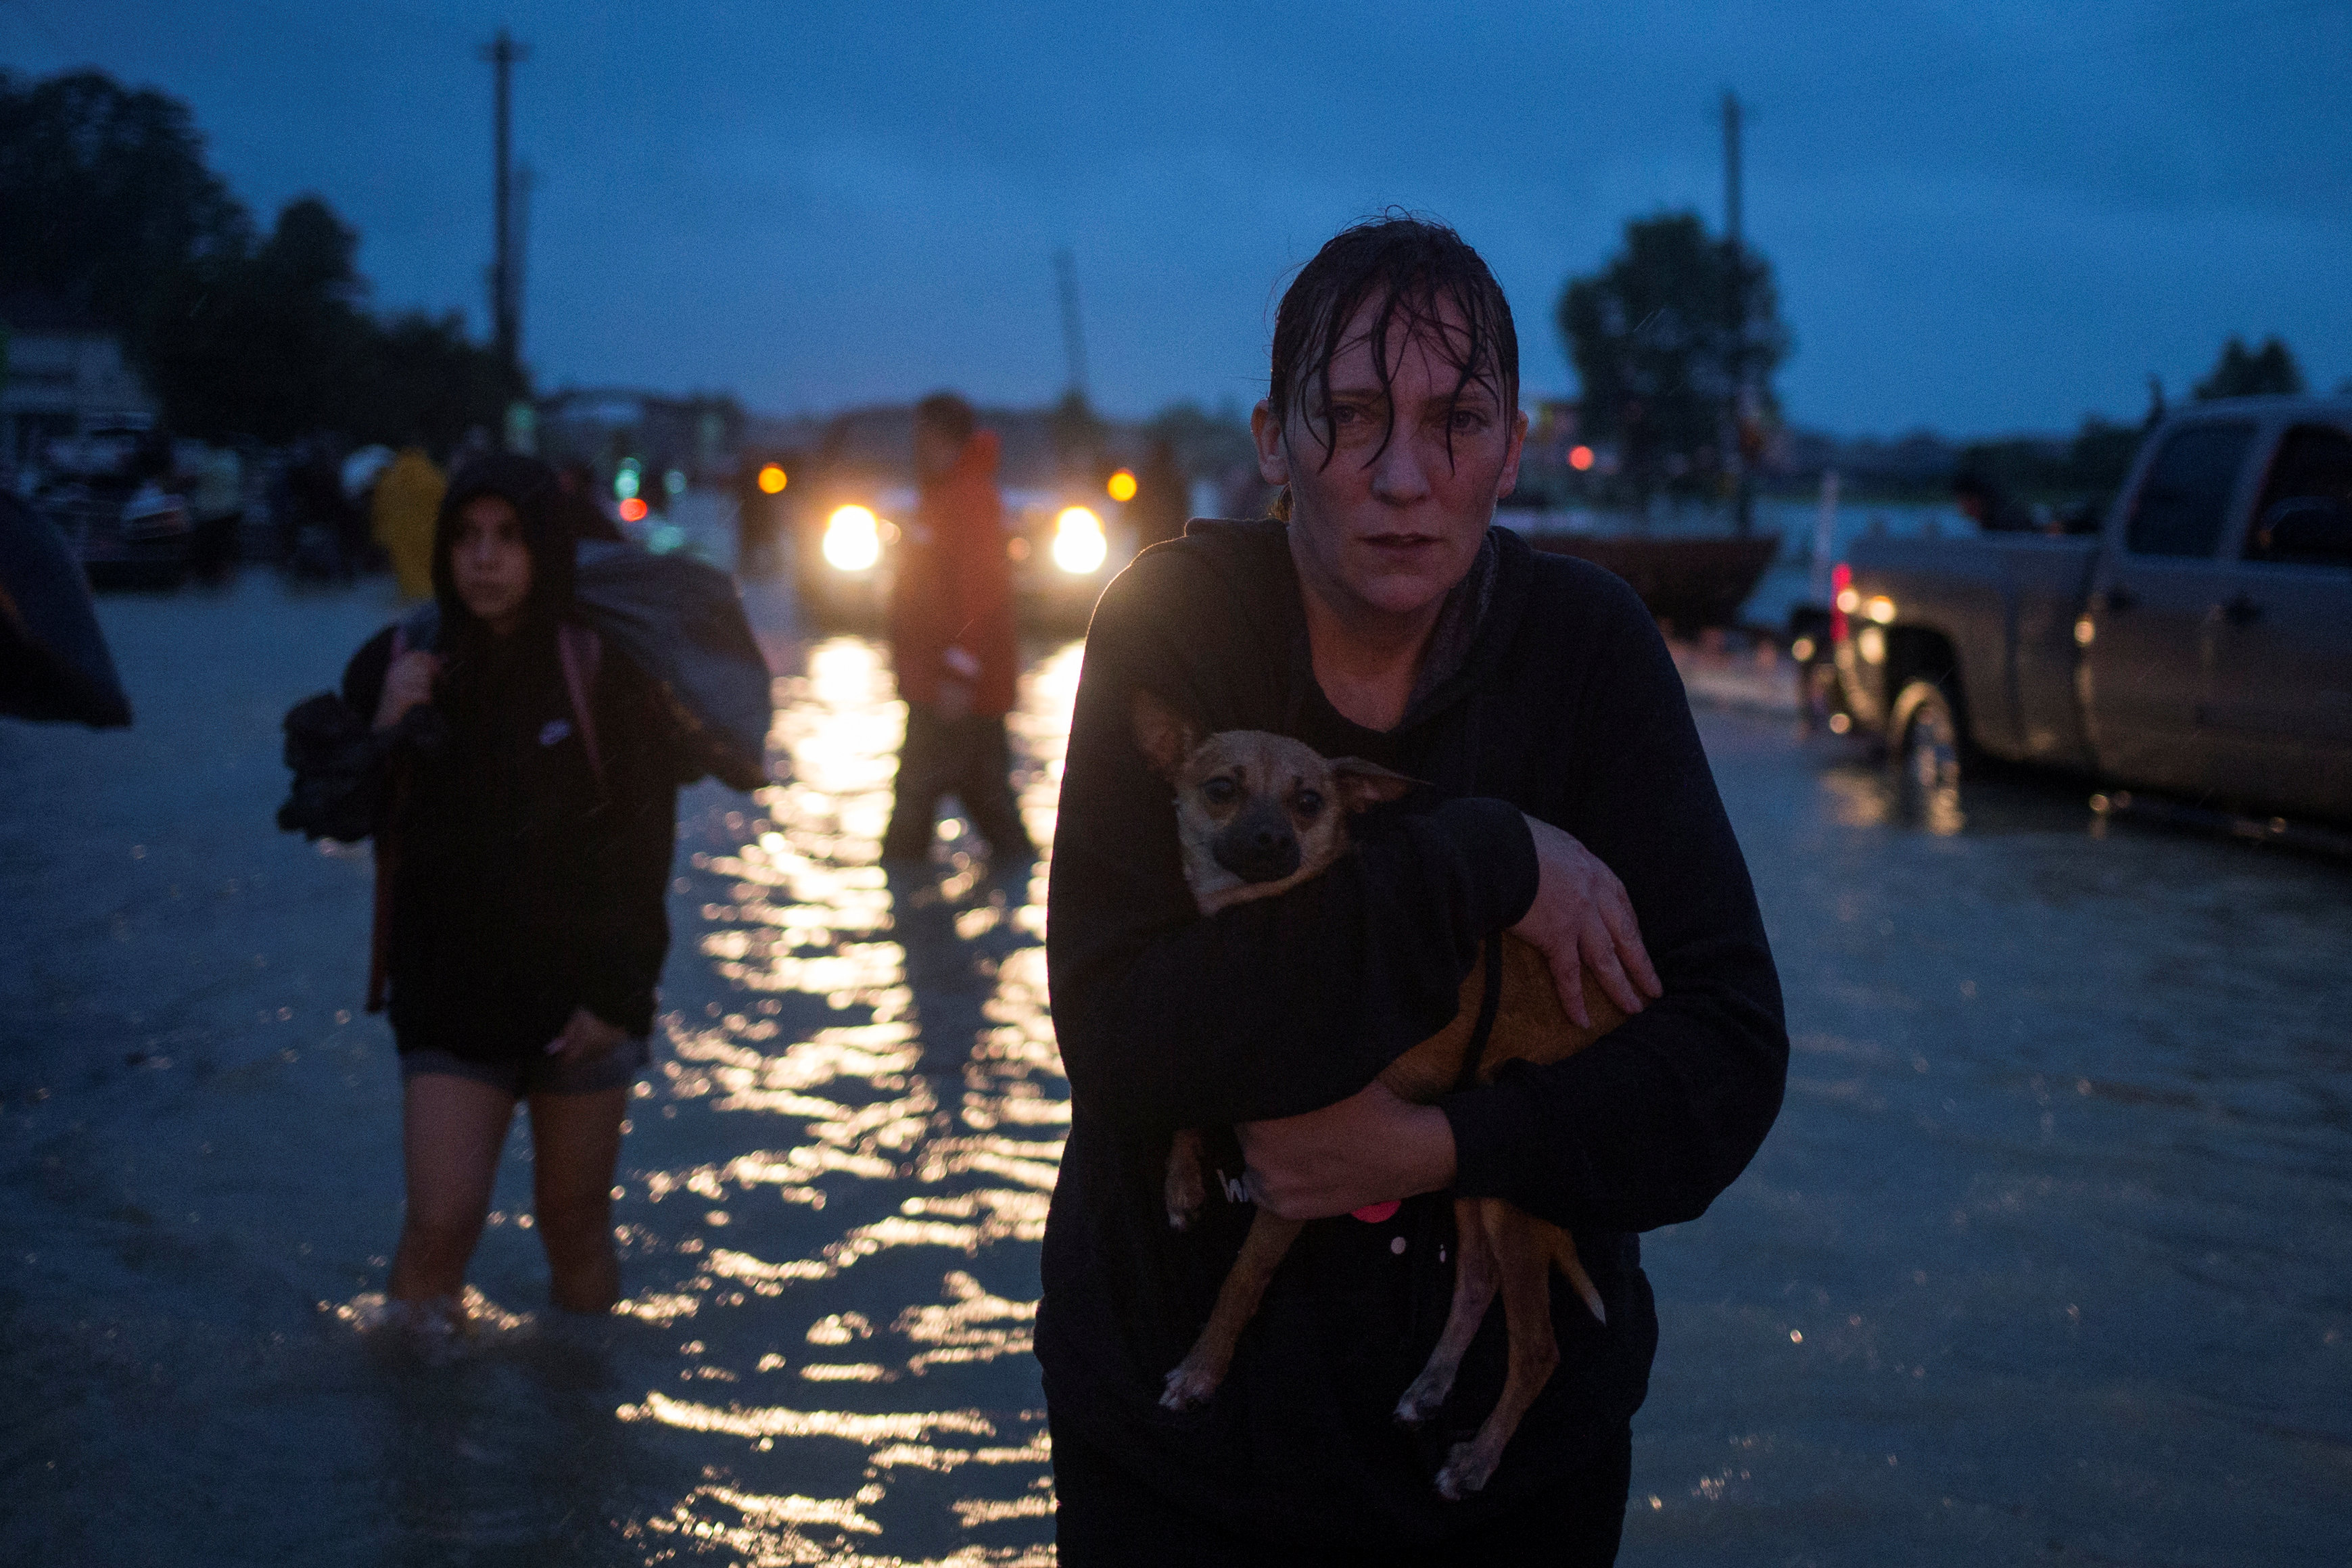 A woman holds her dog as she arrives to high ground after evacuating her home due to floods caused by Tropical Storm Harvey along Tidwell Road in east Houston, Texas on August 28, 2017. (Reuters/Adrees Latif)